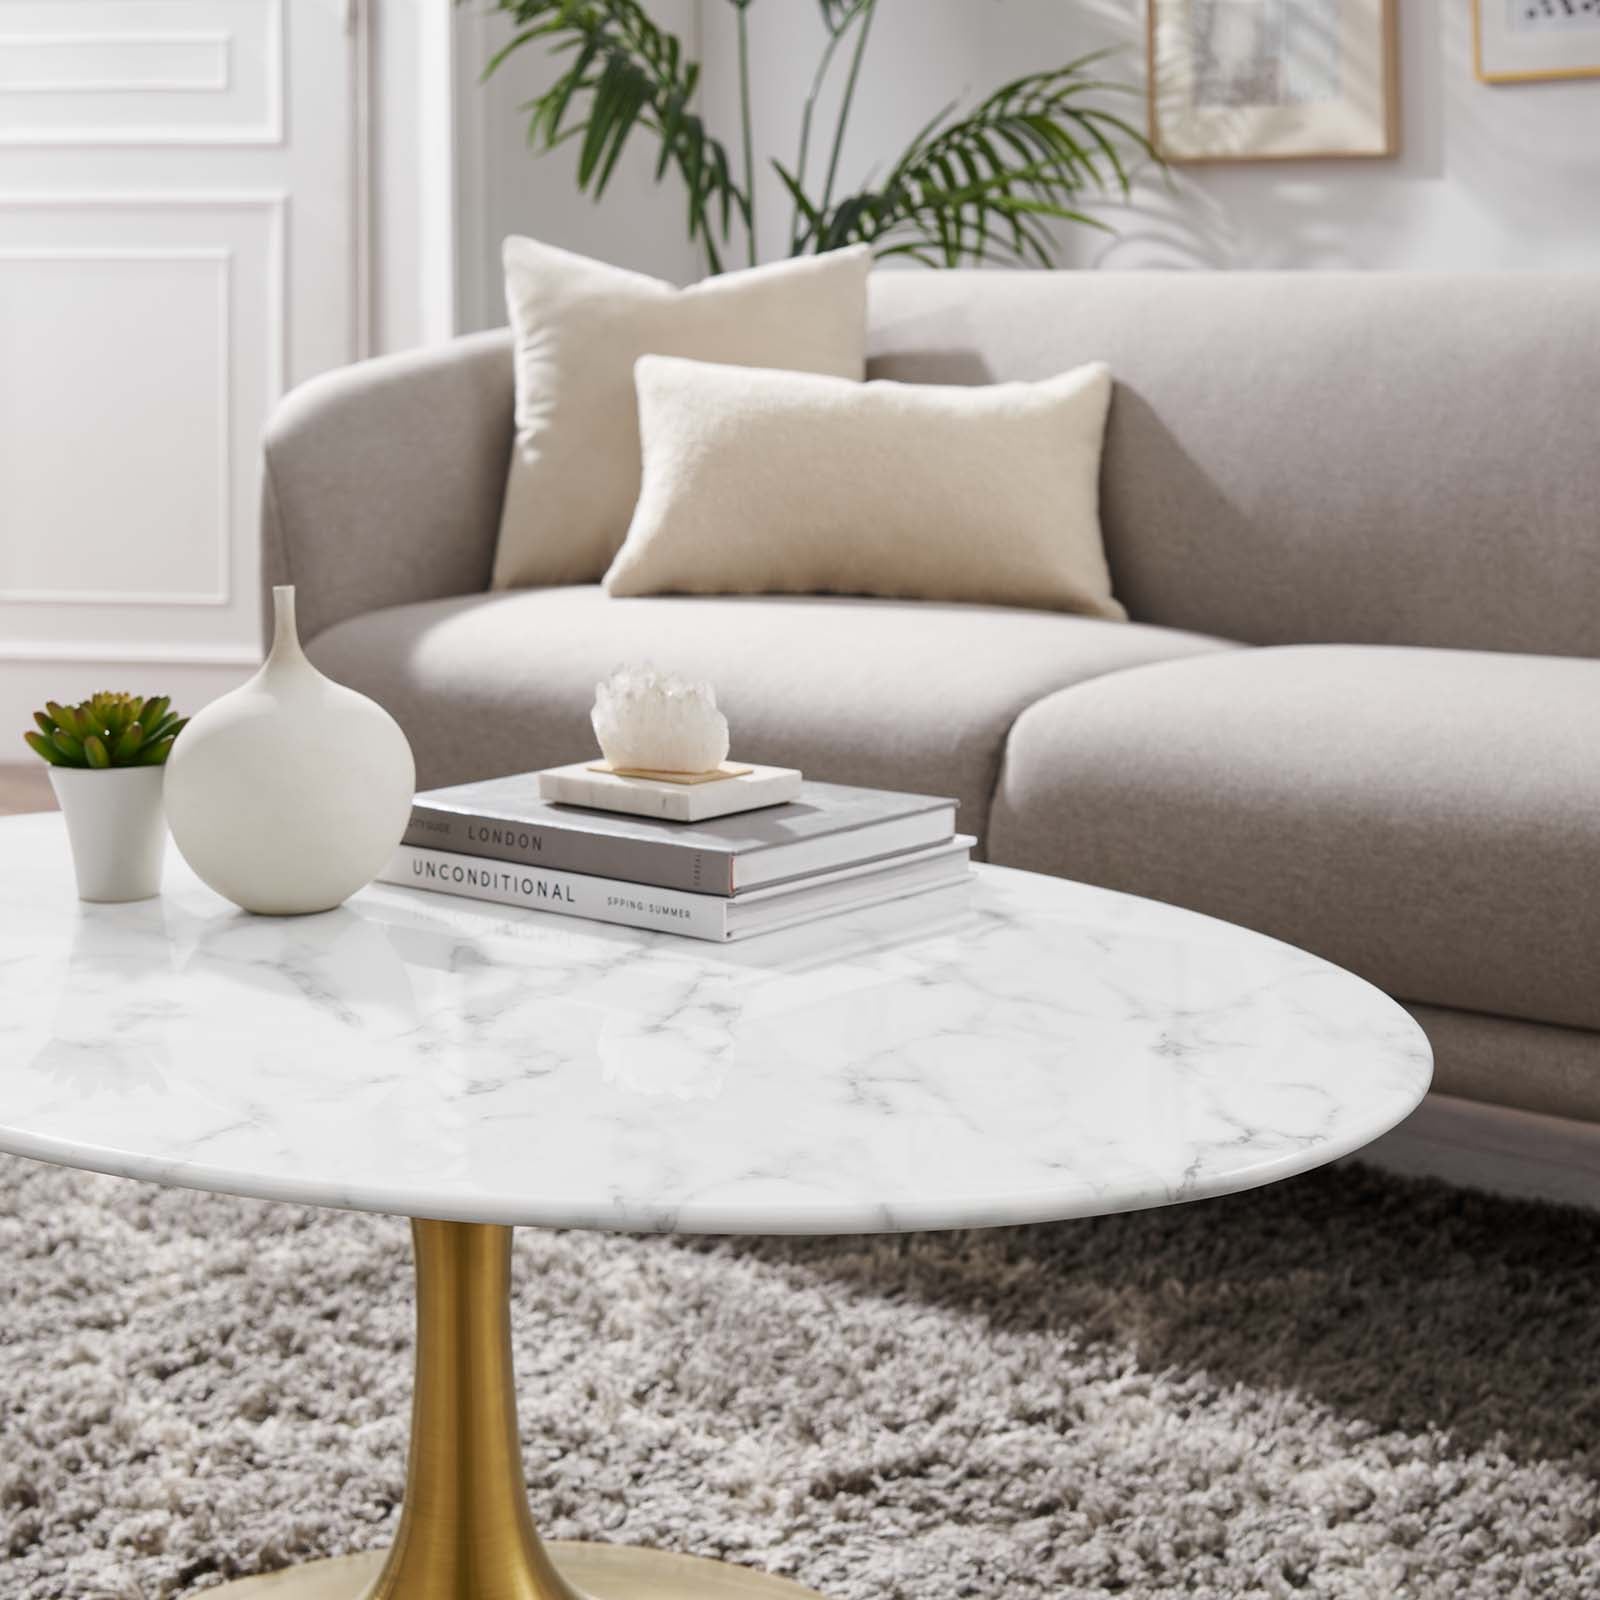 Lippa 42" Oval-Shaped Artifical Artificial Marble Coffee Table - East Shore Modern Home Furnishings